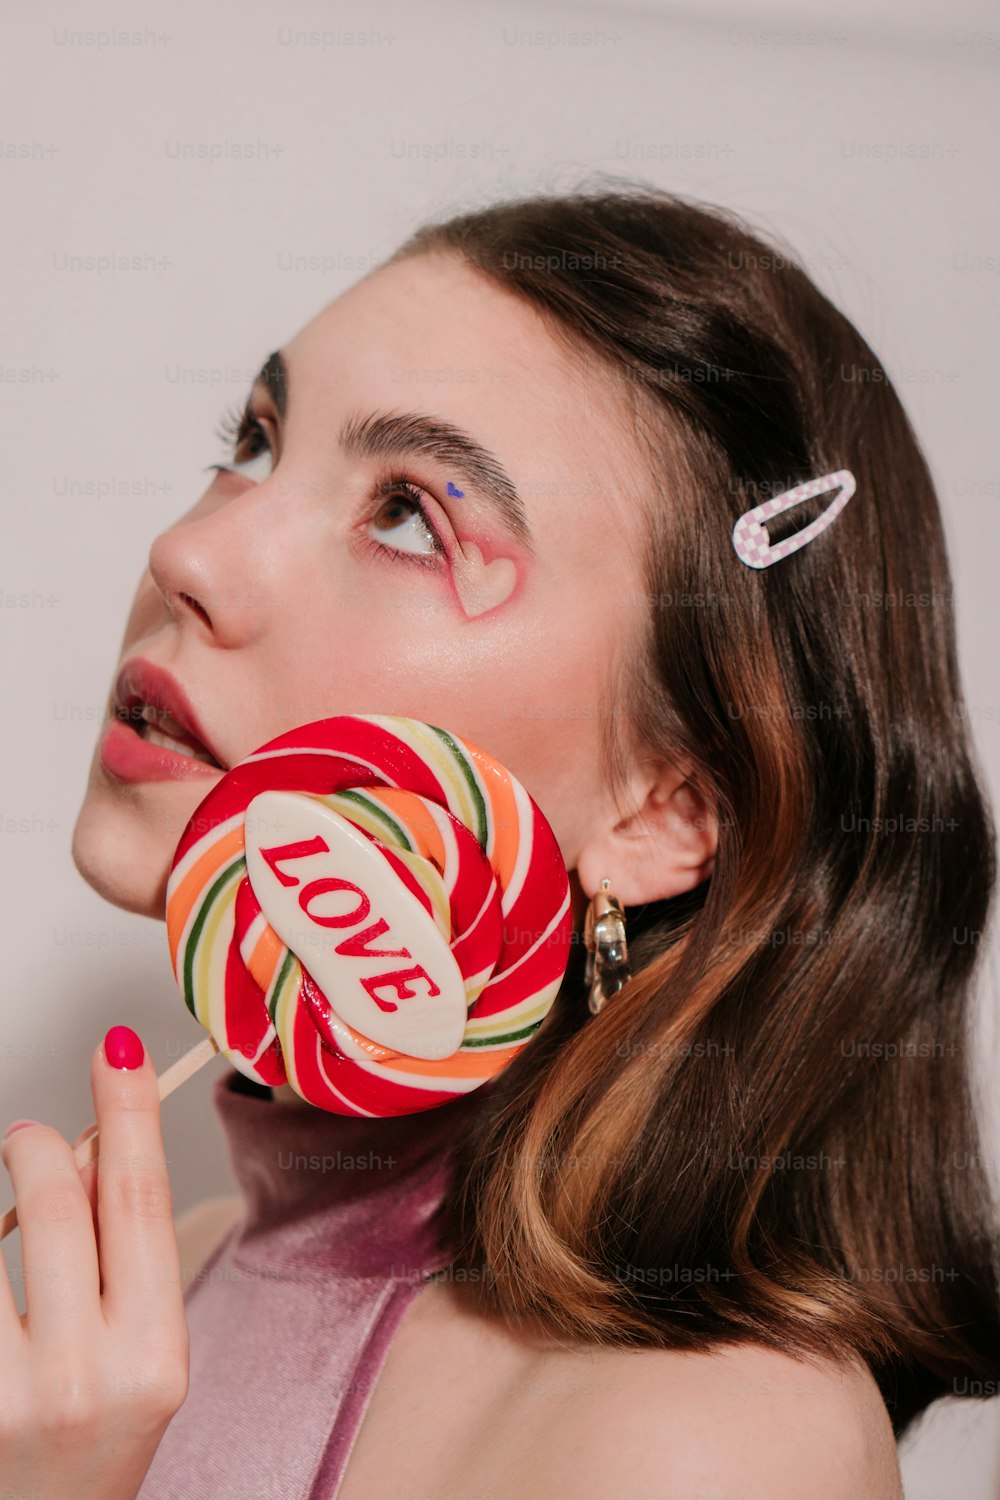 a woman holding a lollipop in her mouth